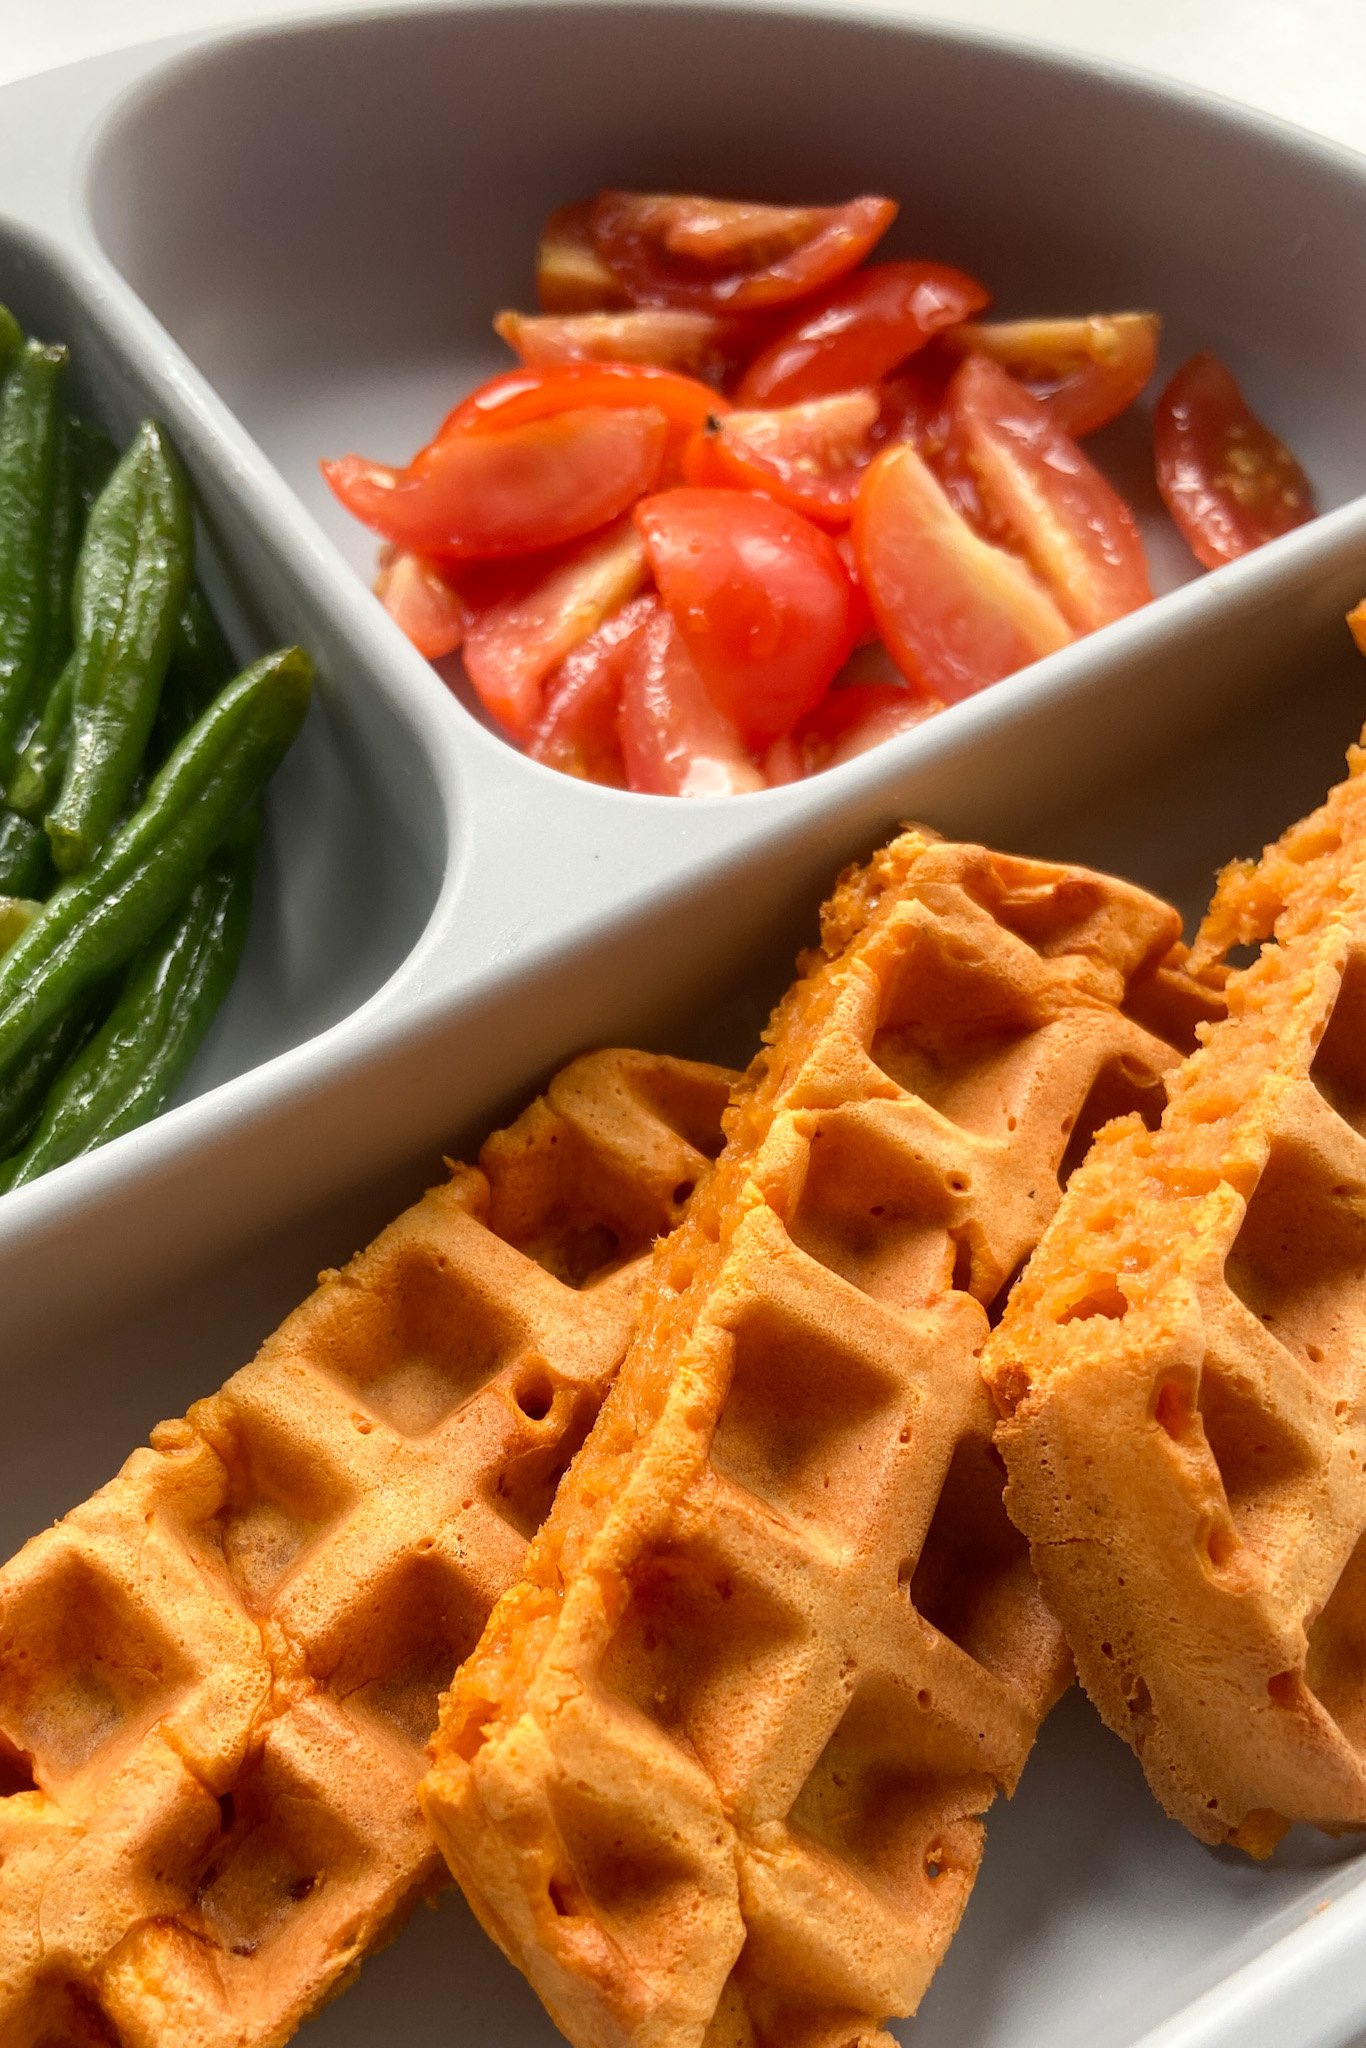 Pizza waffles served with green beans and quartered tomatoes